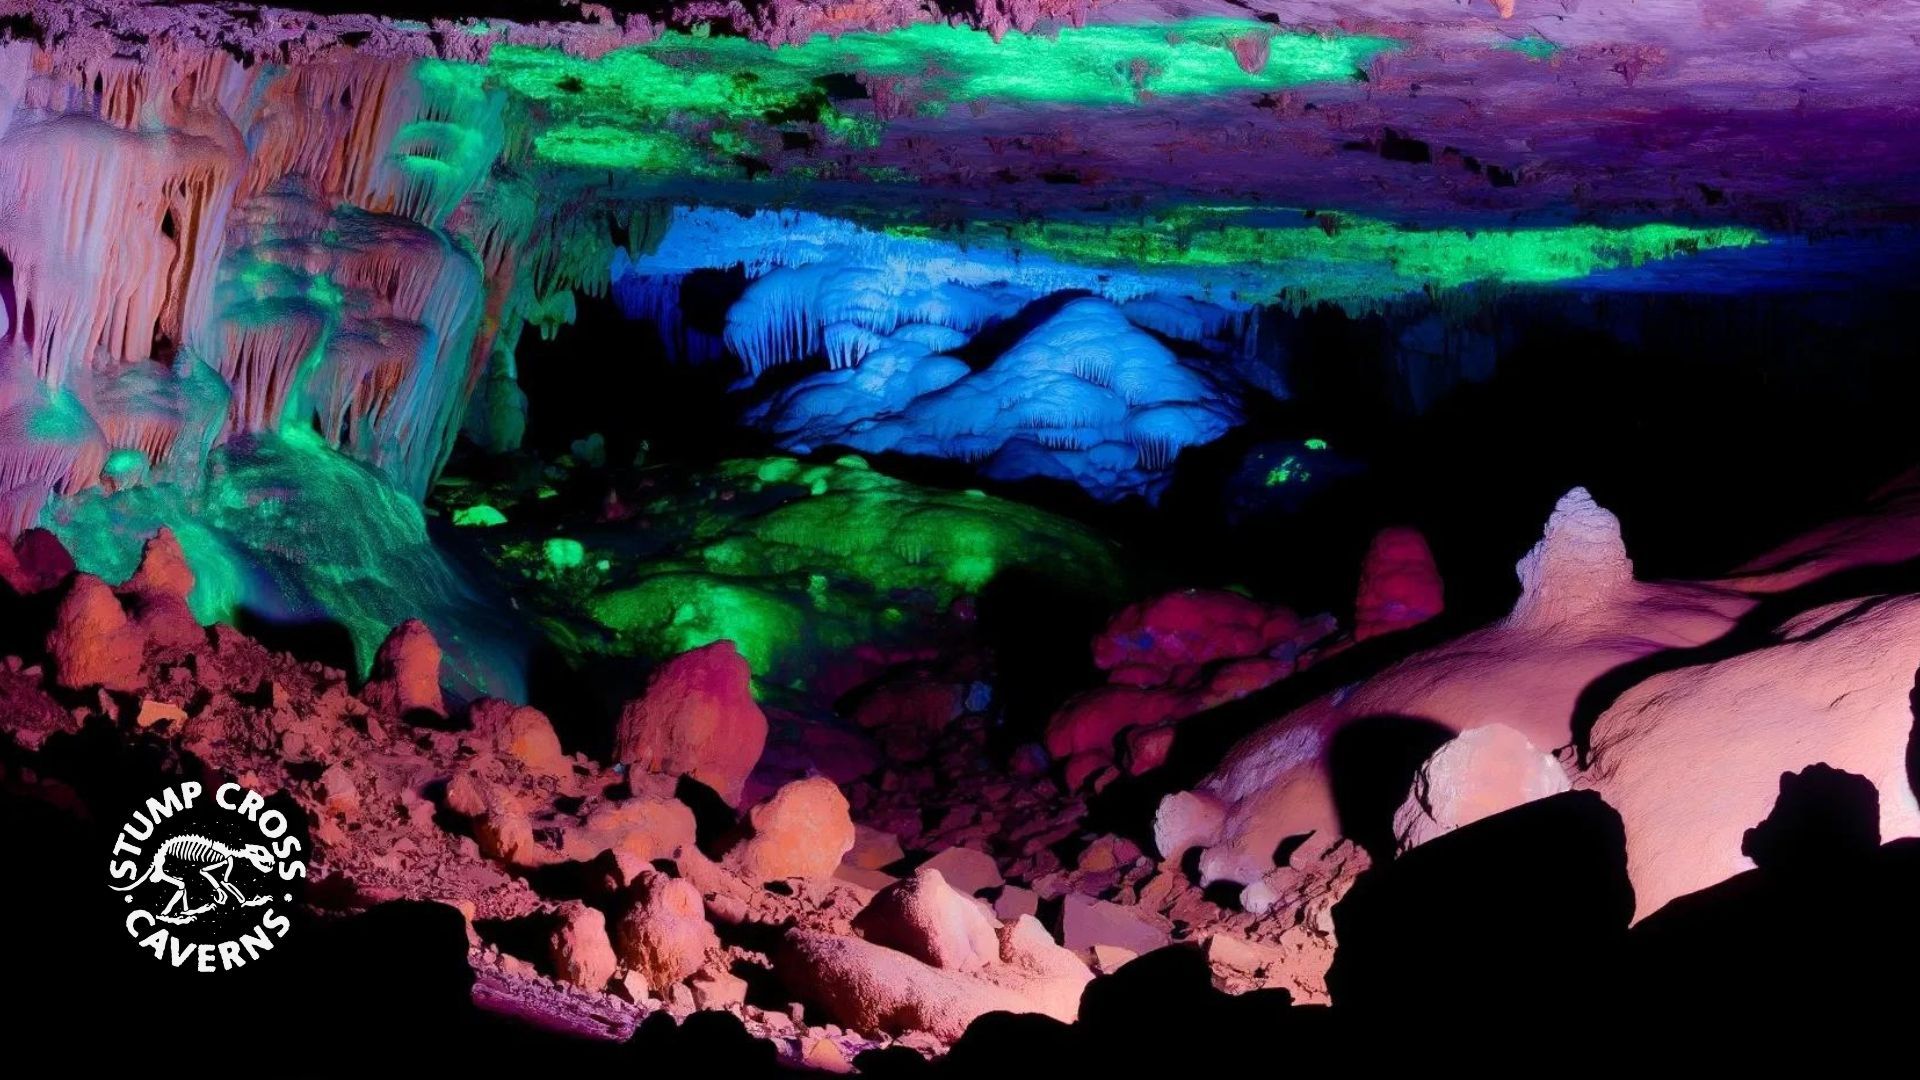 At Stump Cross Caverns, the rocks glow under UV light. But why? Learn all about it in our explainer 